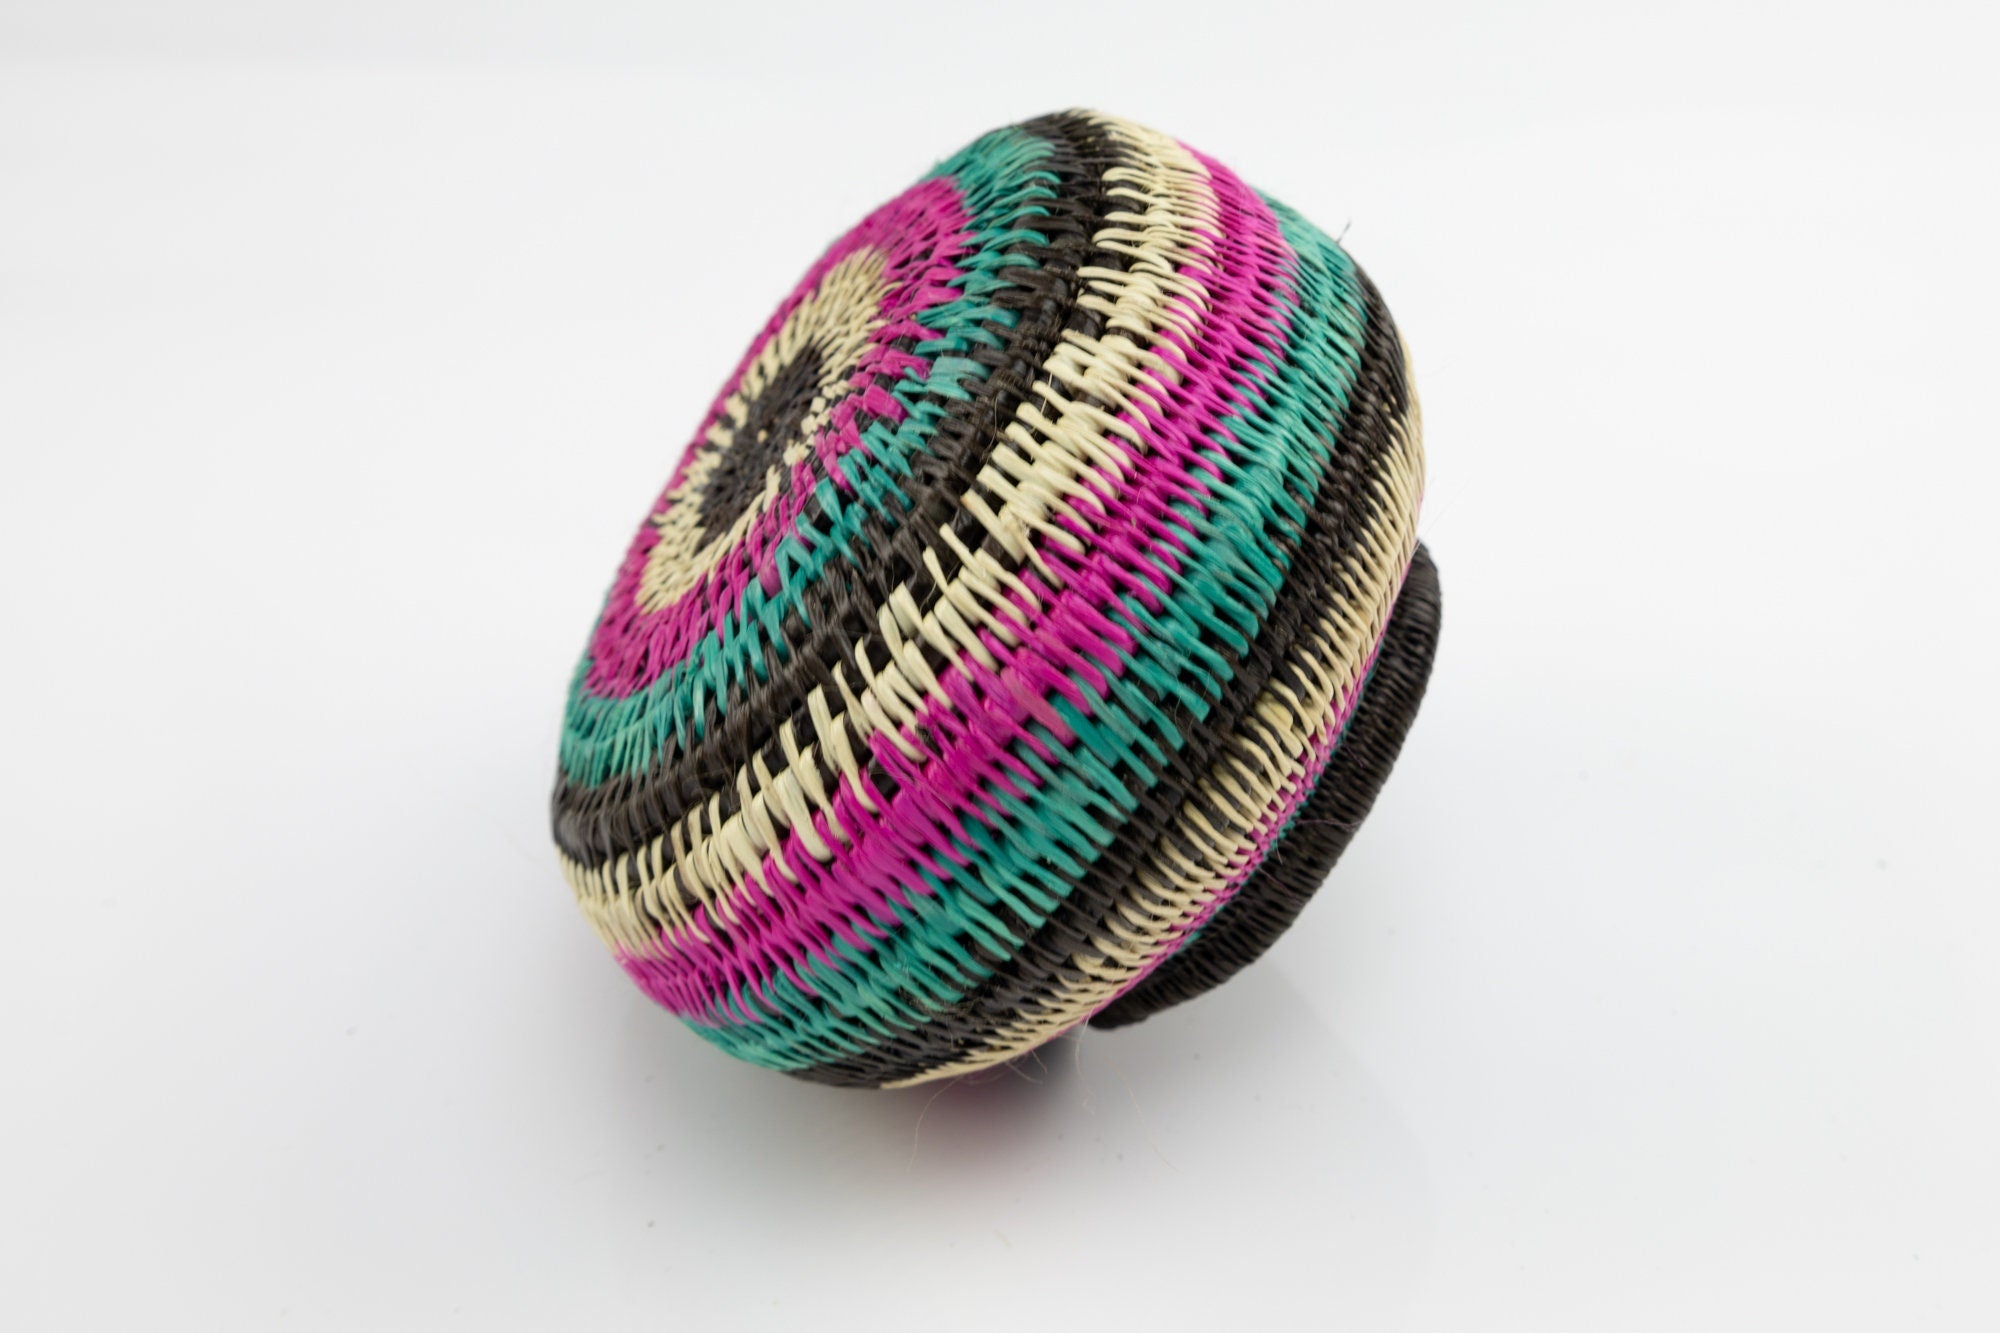 Hand Woven Special Color Basket Made By Wounaan And Emberá Panama Indians. Bowl Basket, Woven Basket, Basket Decor, Woven Storage